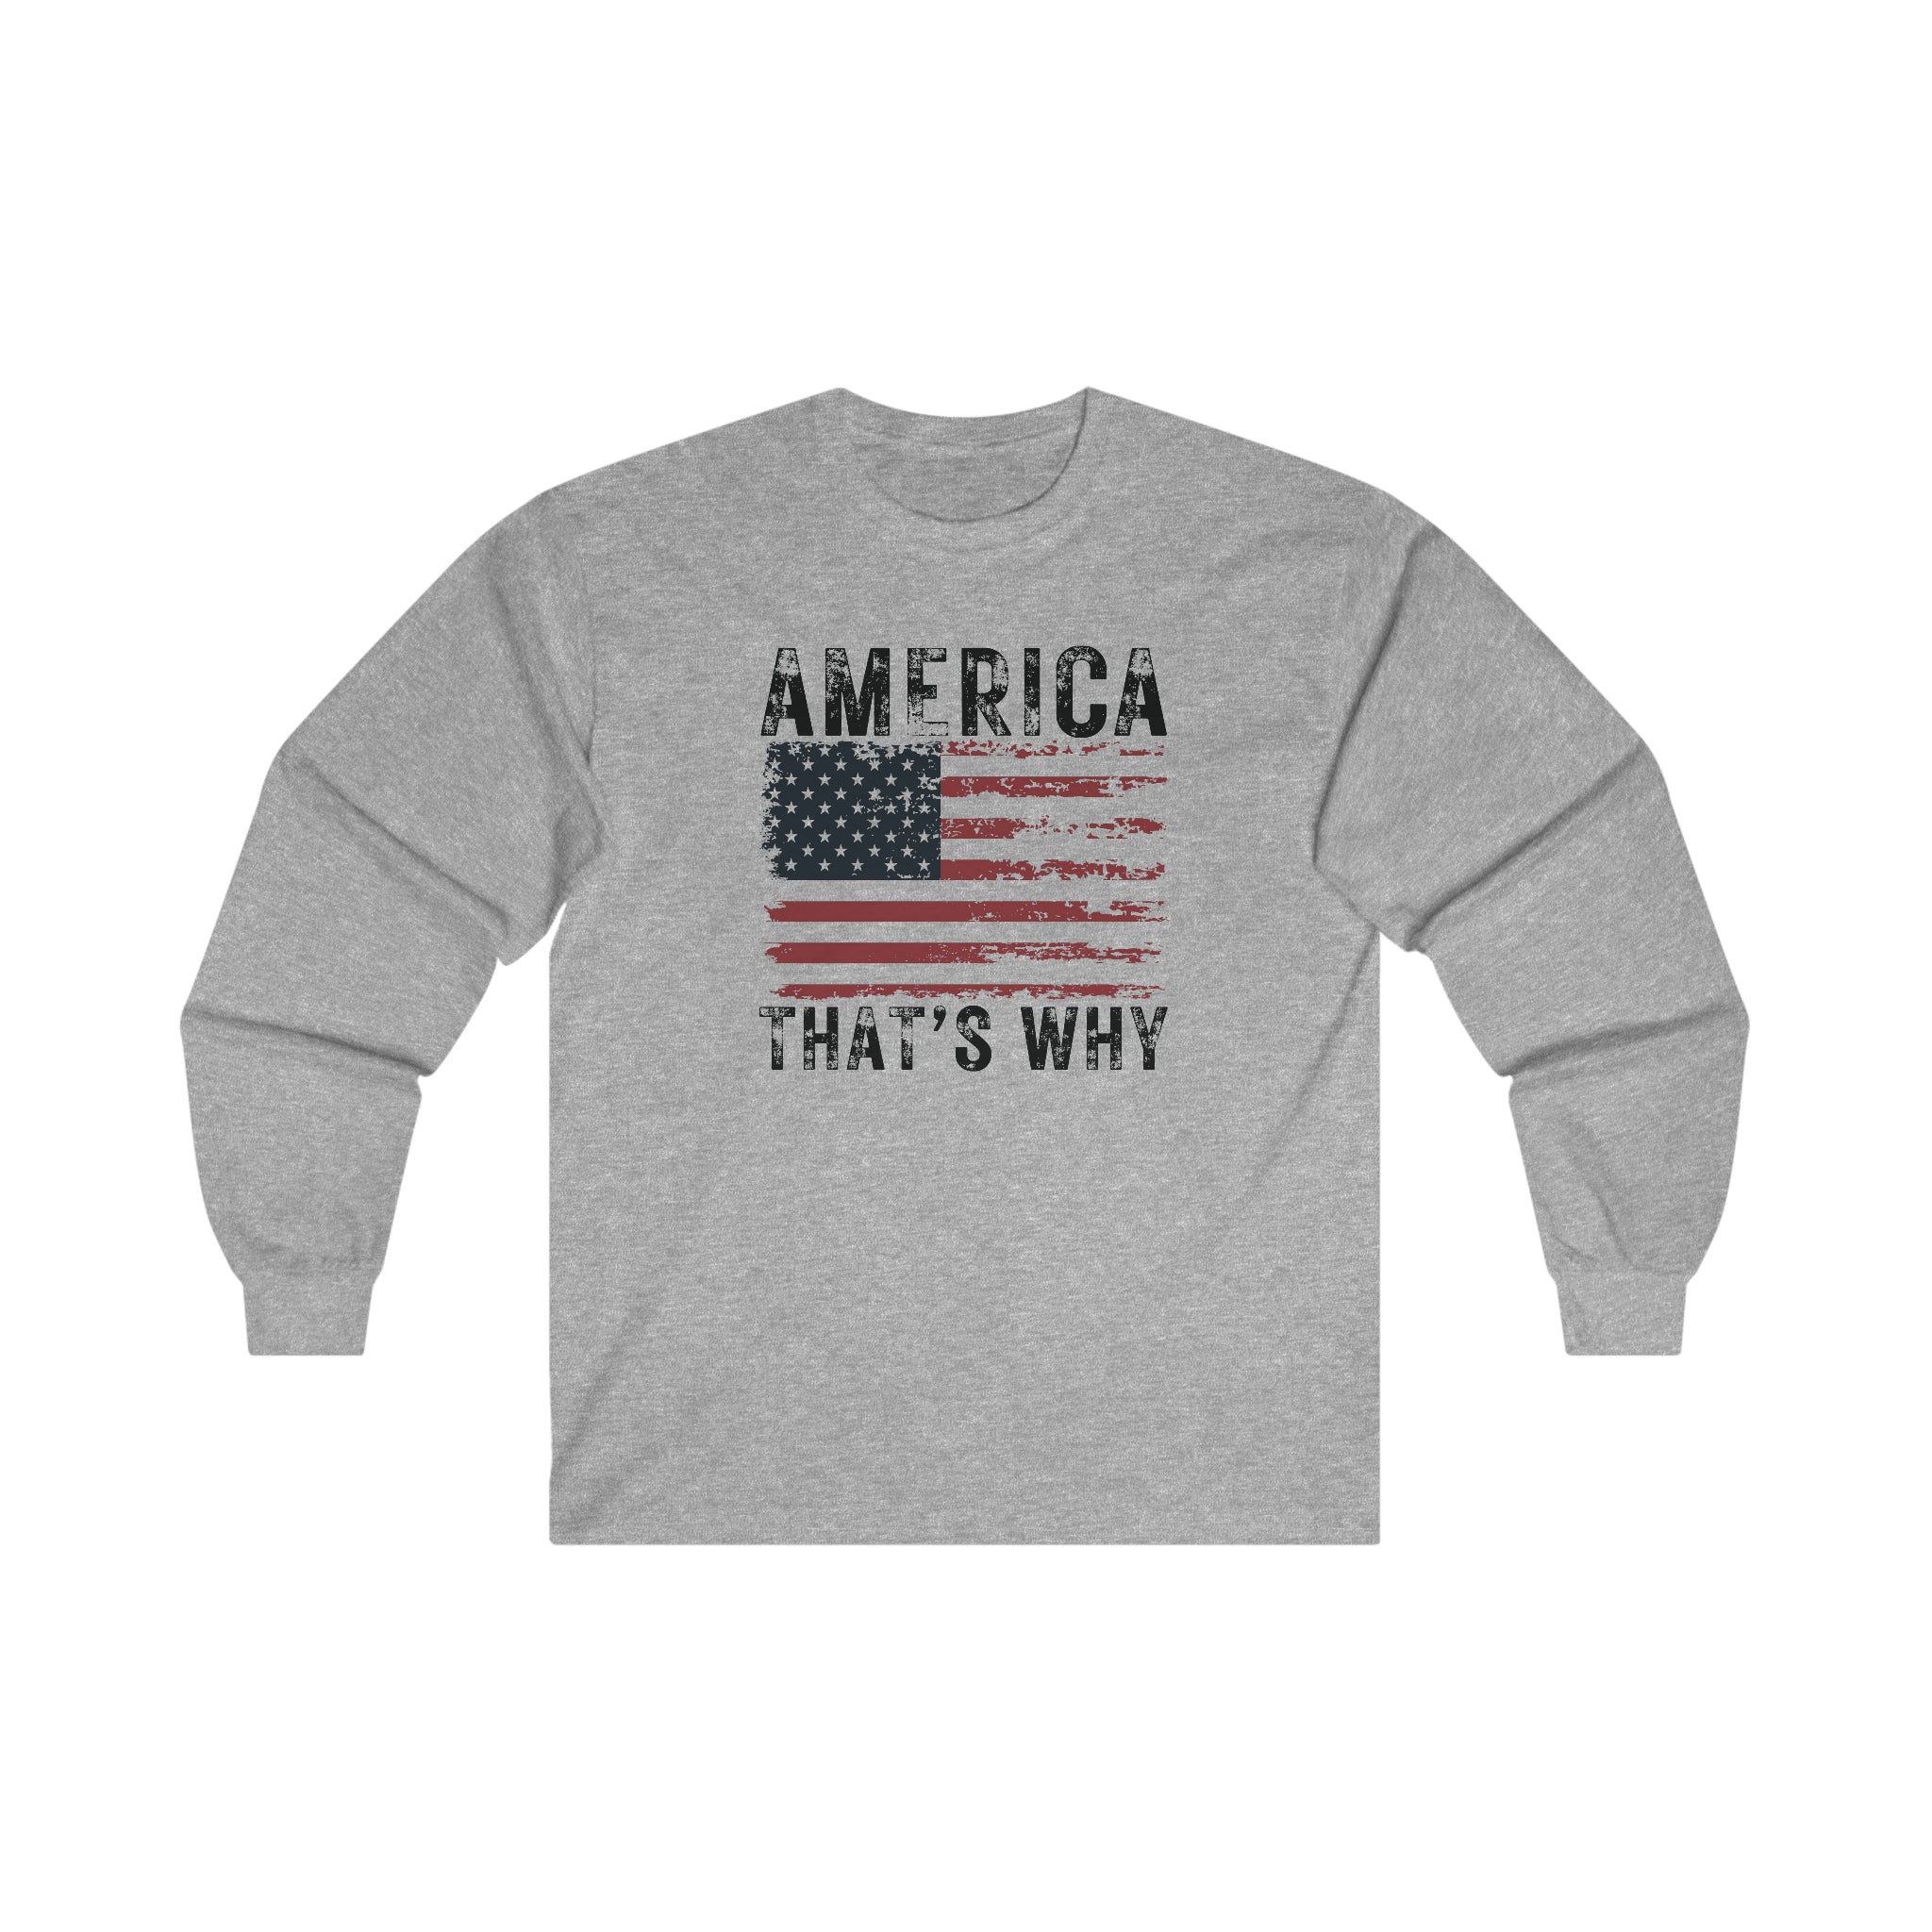 America That's Why Long-Sleeve T-Shirt